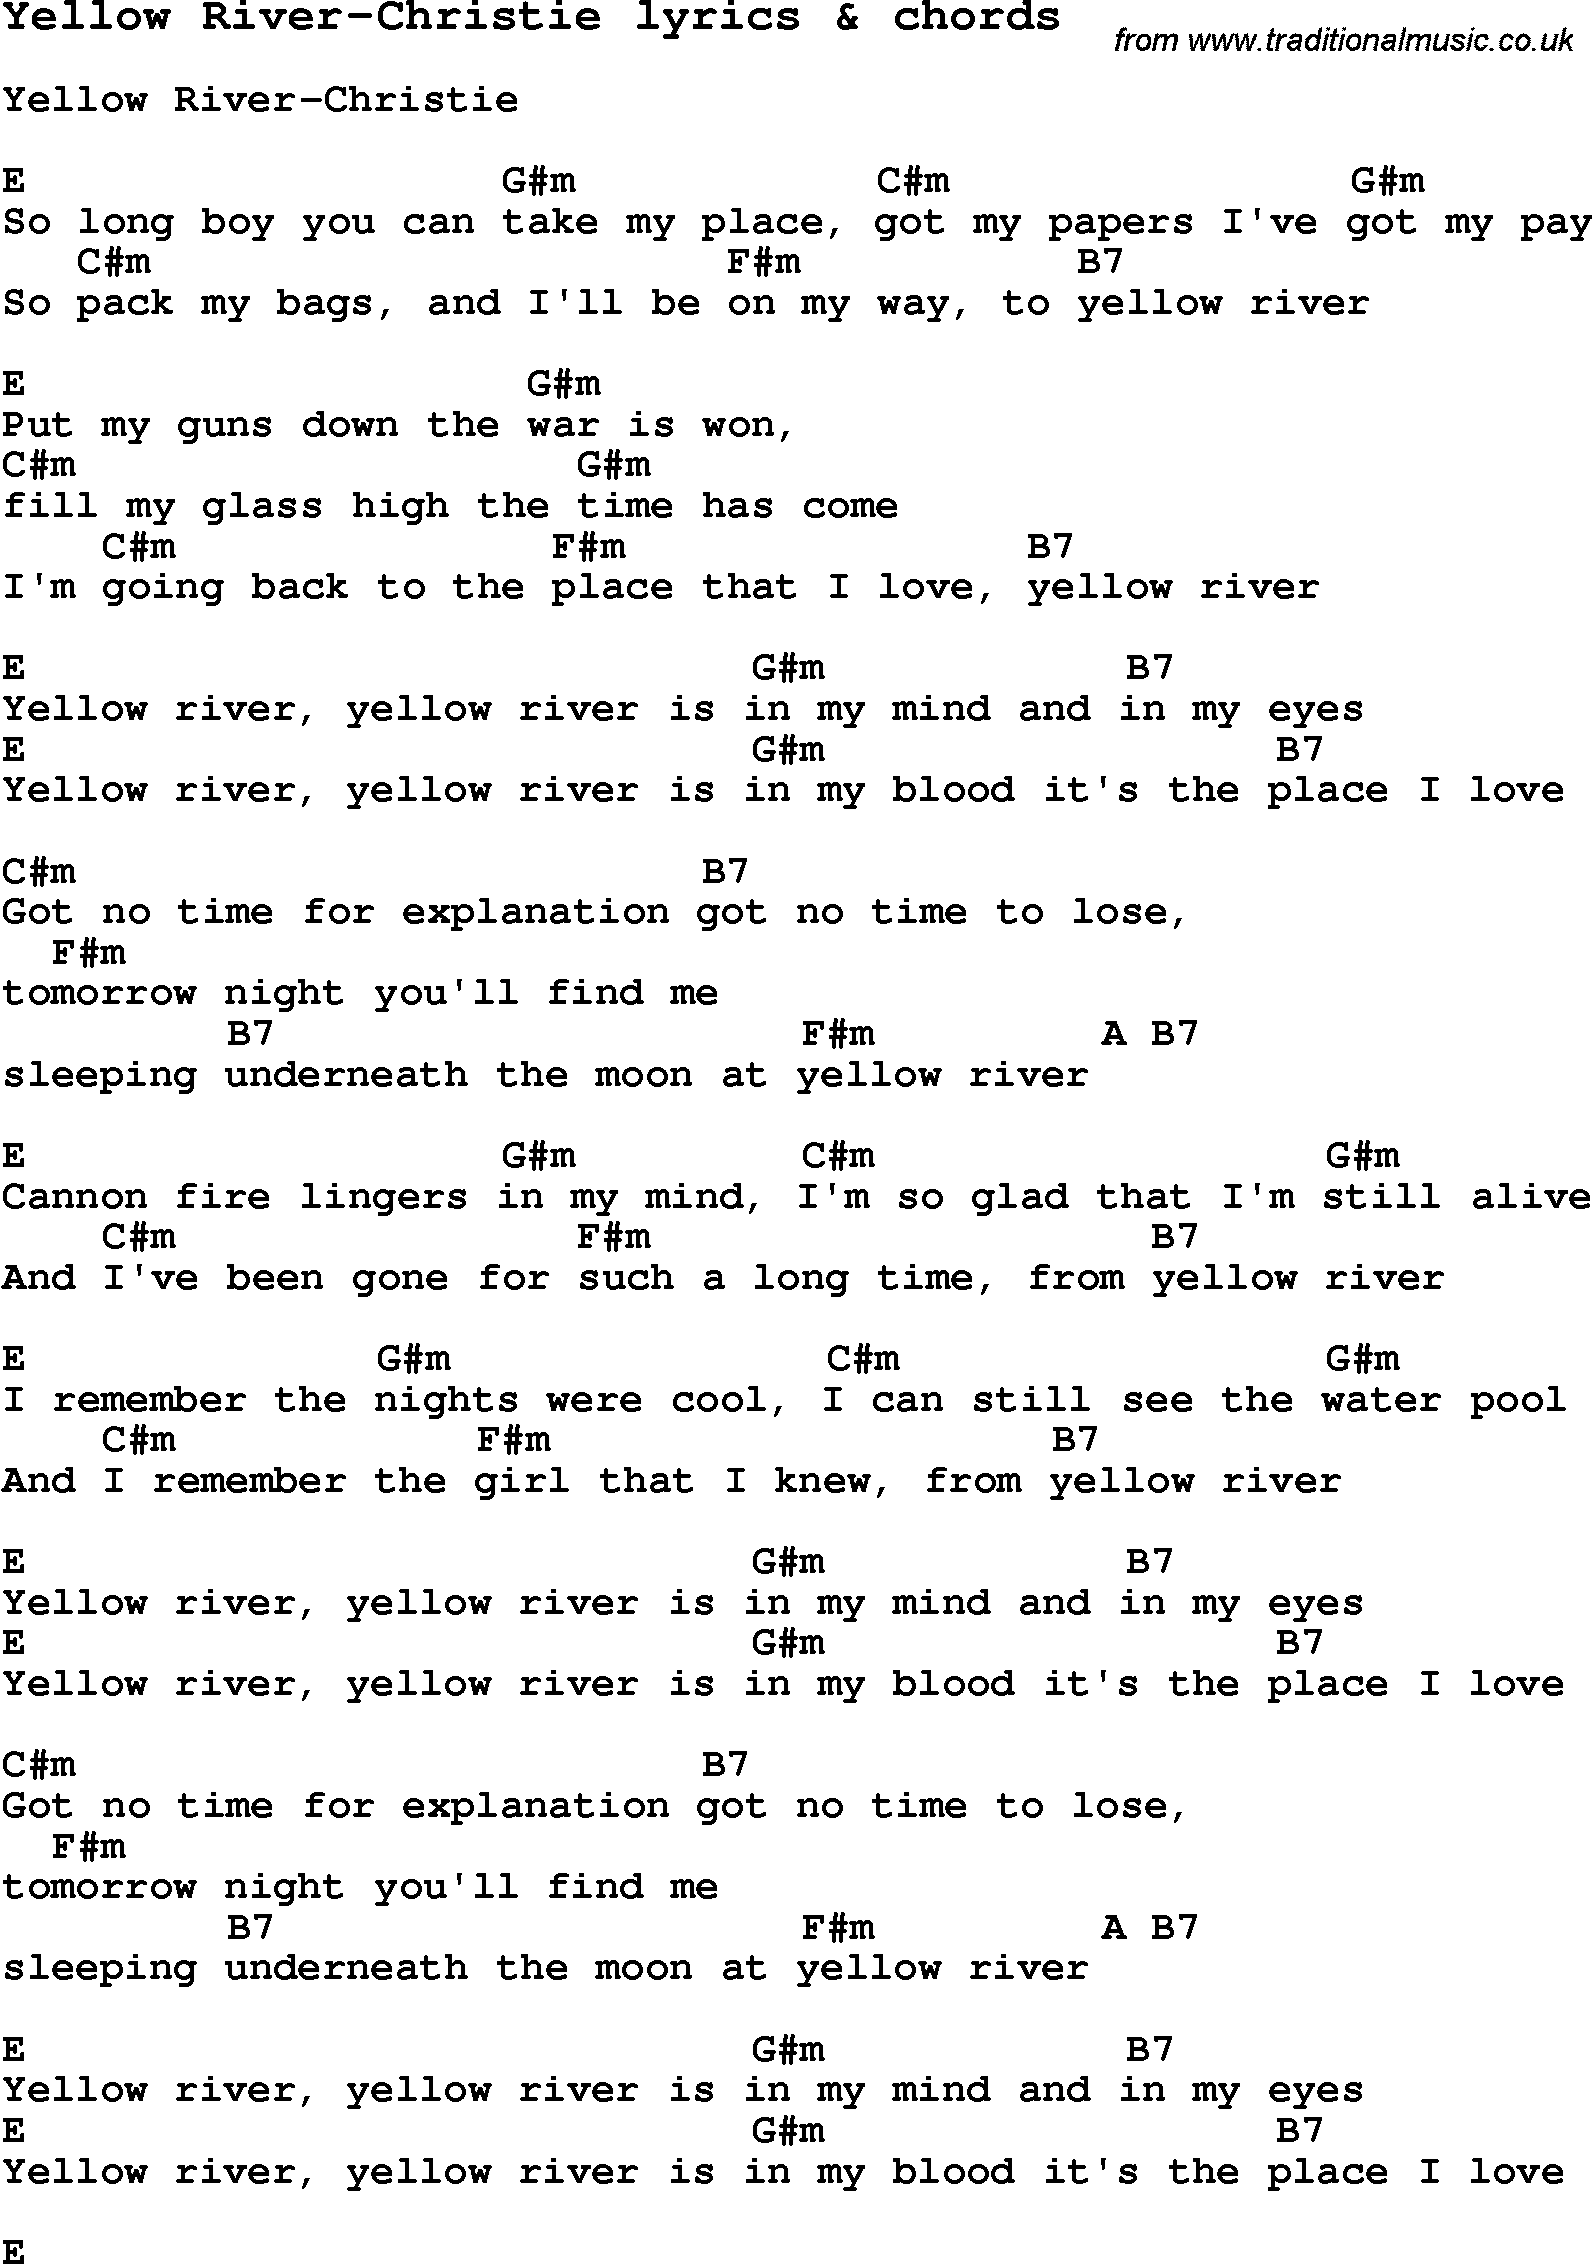 Love Song Lyrics for: Yellow River-Christie with chords for Ukulele, Guitar Banjo etc.